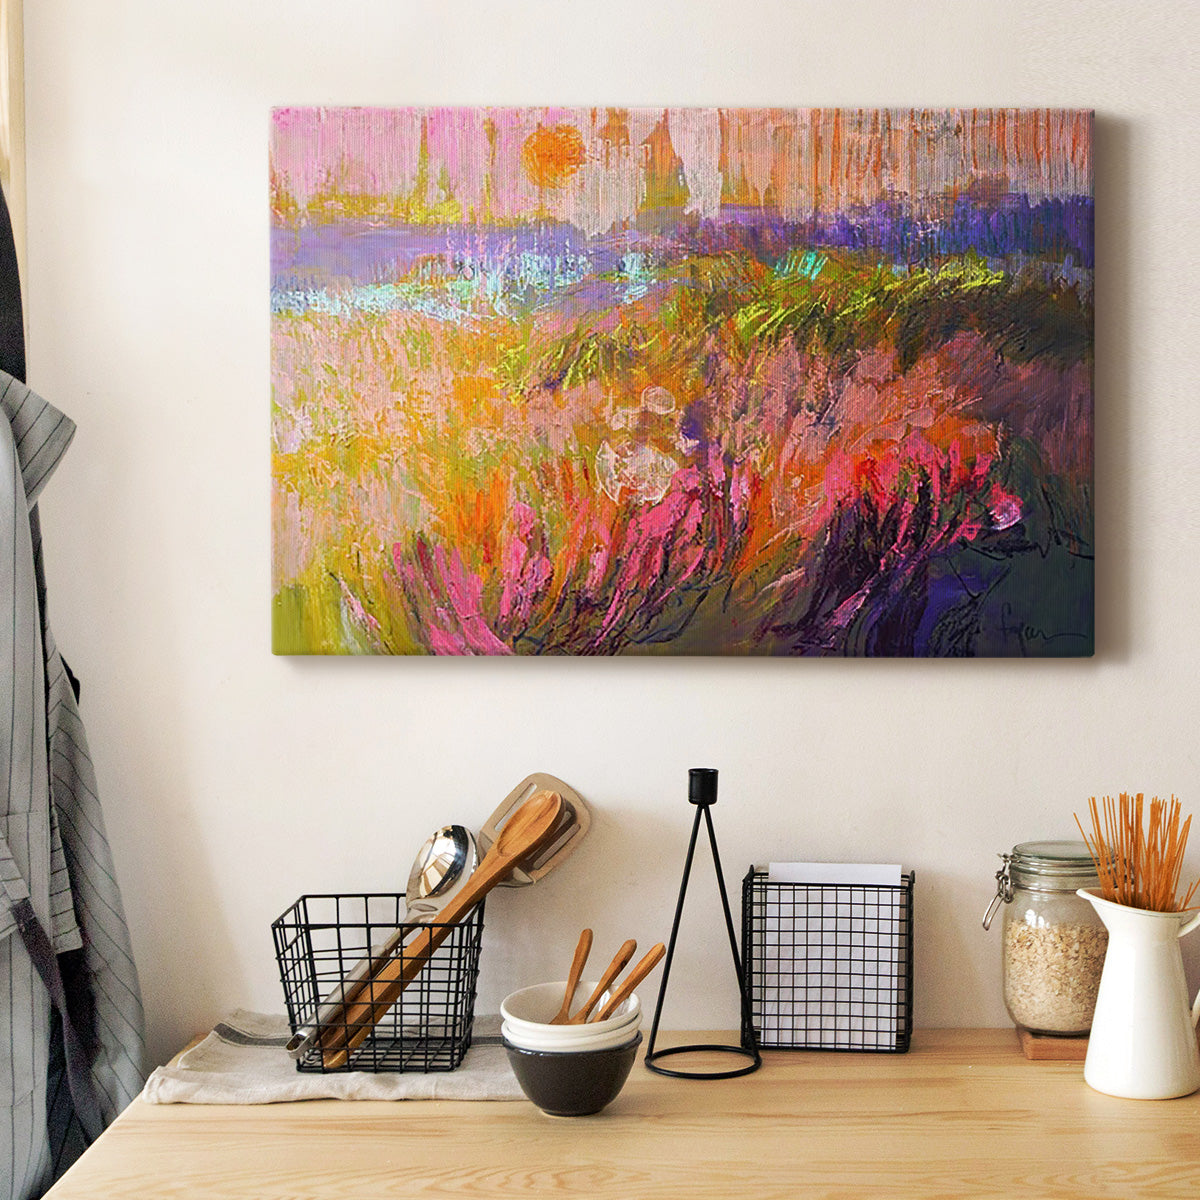 Among the Green Pastures VI Premium Gallery Wrapped Canvas - Ready to Hang